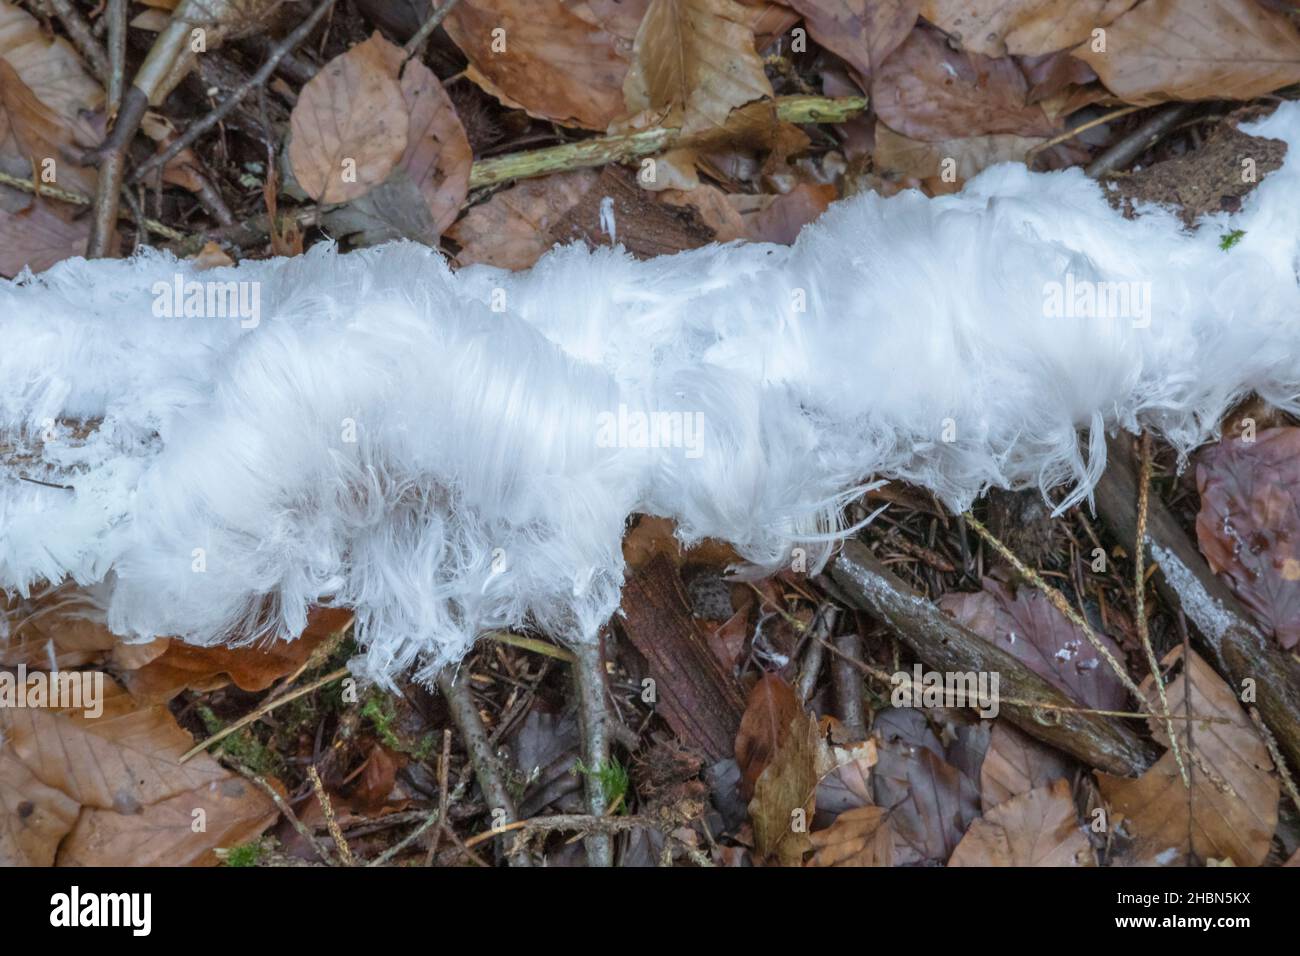 Hair ice formed on decaying wood, Sidwood, Northumberland, UK Stock Photo